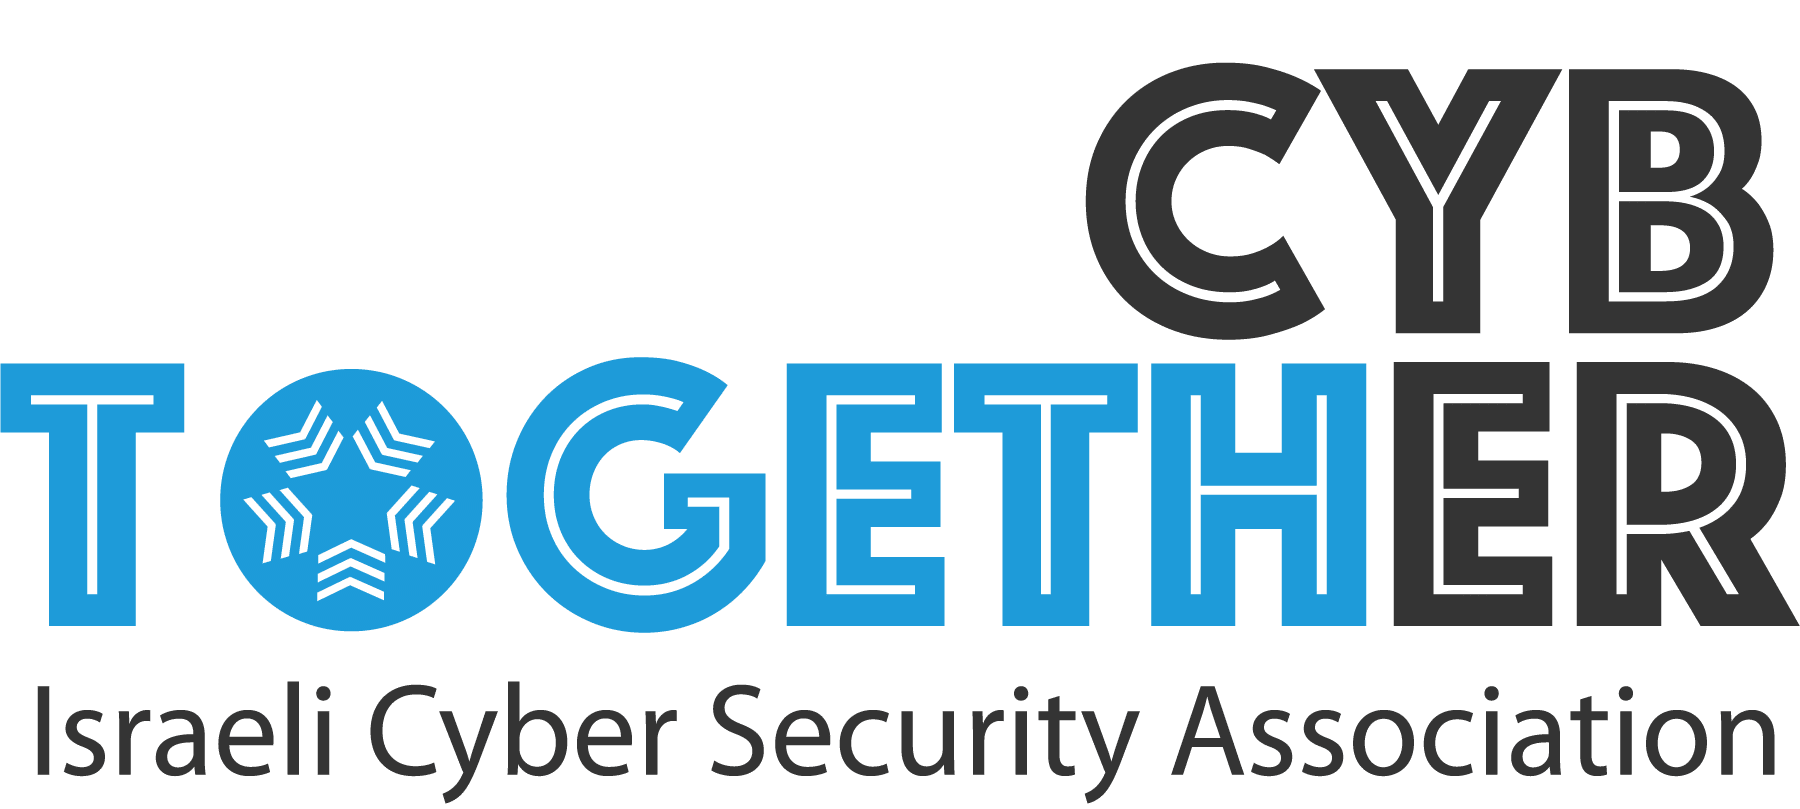 Cyber Together